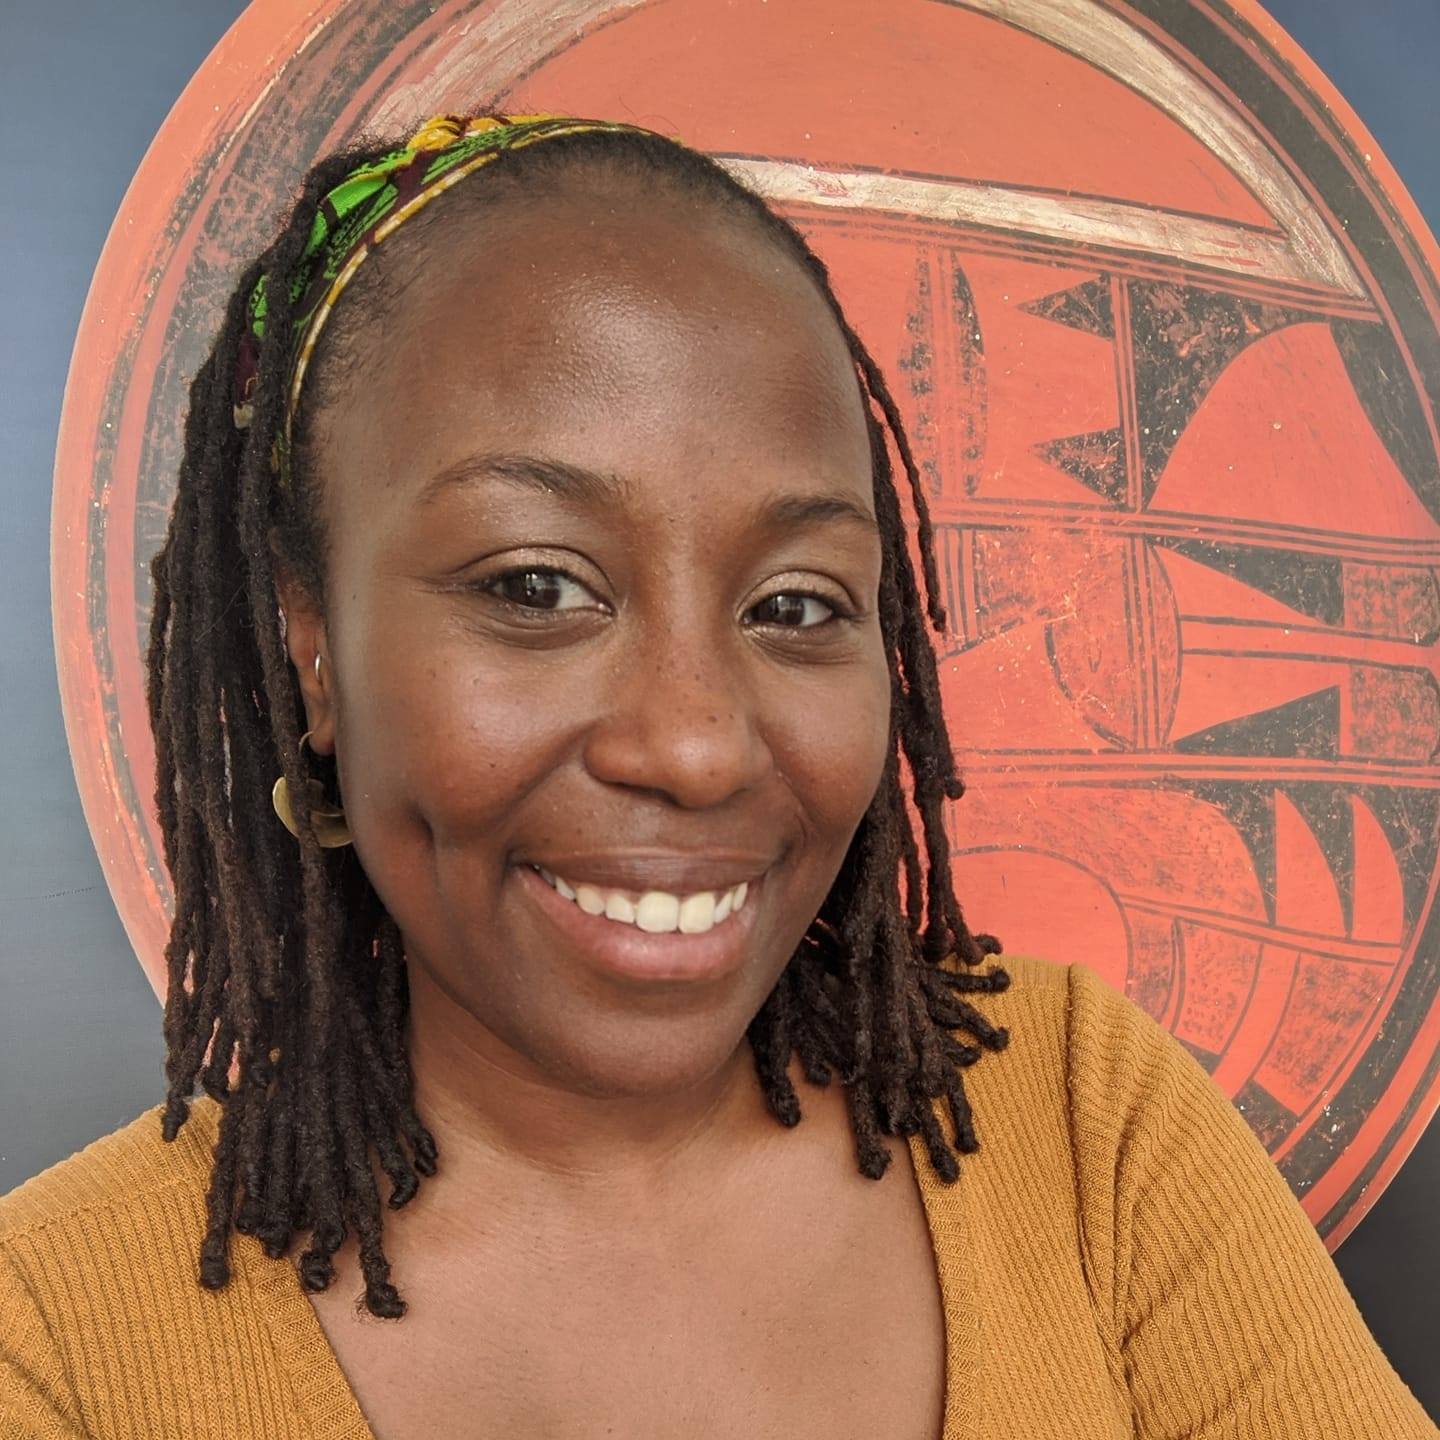 Jen is a Black woman with a warm smile, shoulder length locks, and a patterned head scarf. She is wearing a gold top, and stands in front of a black and red circular painting.